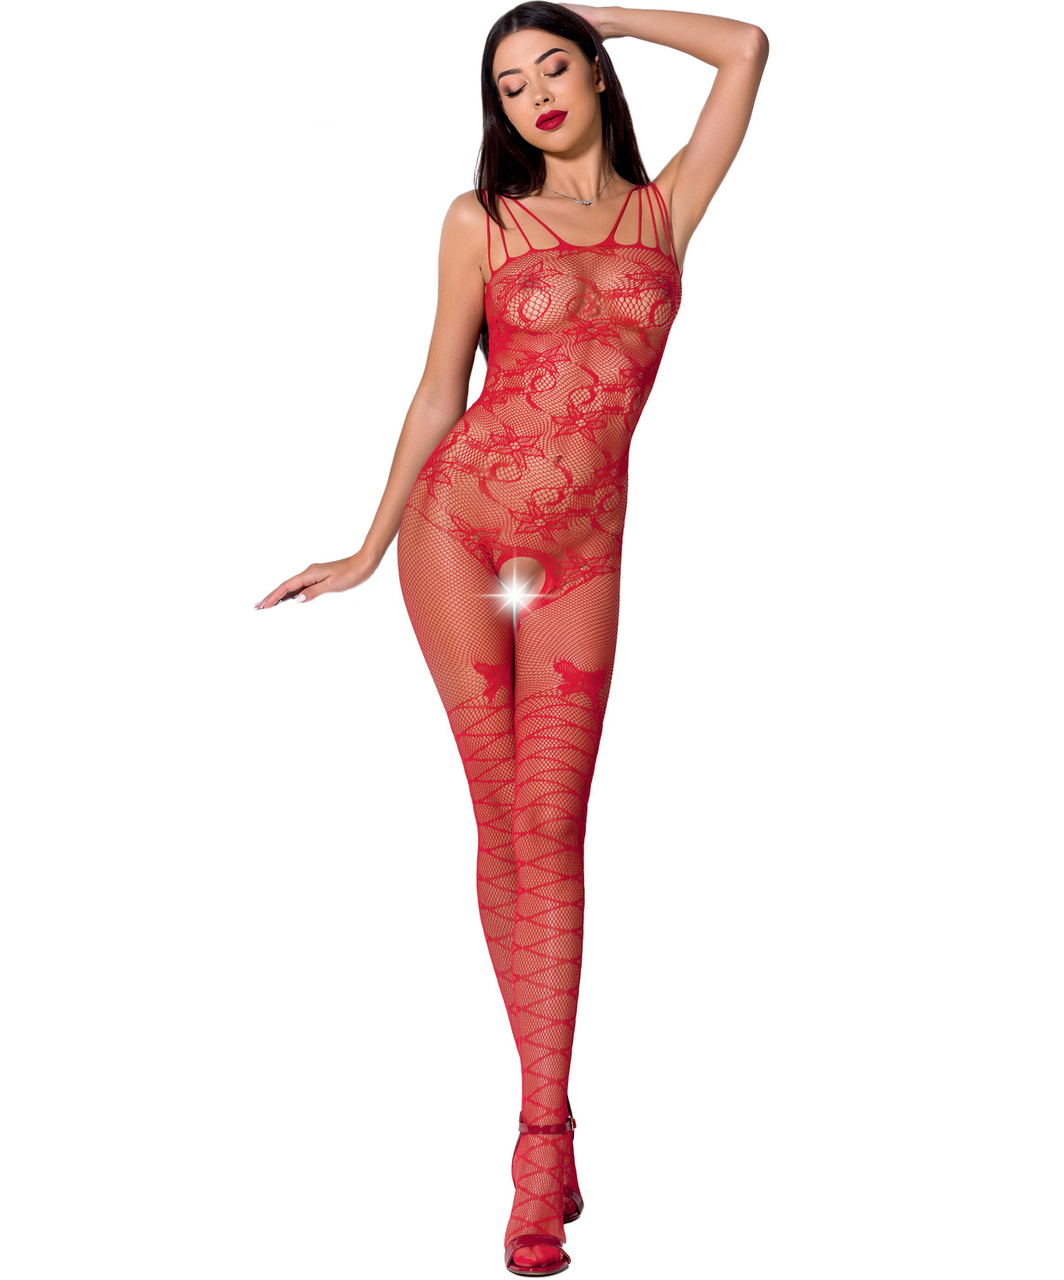 Passion BS076 net crotchless bodystocking